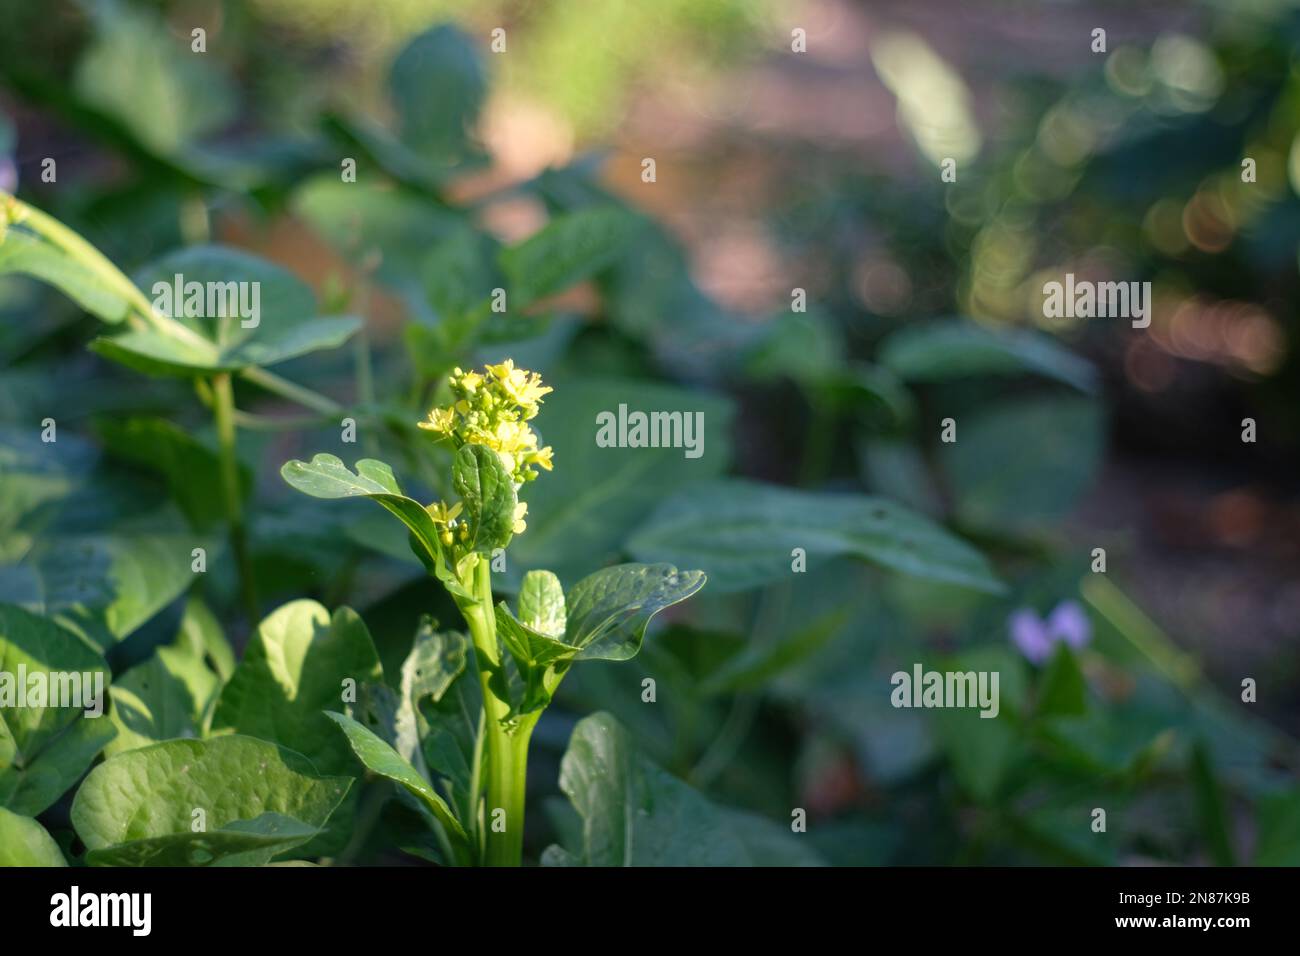 A closeup of spring camelina (Camelina sativa) in a garden against blurred background Stock Photo